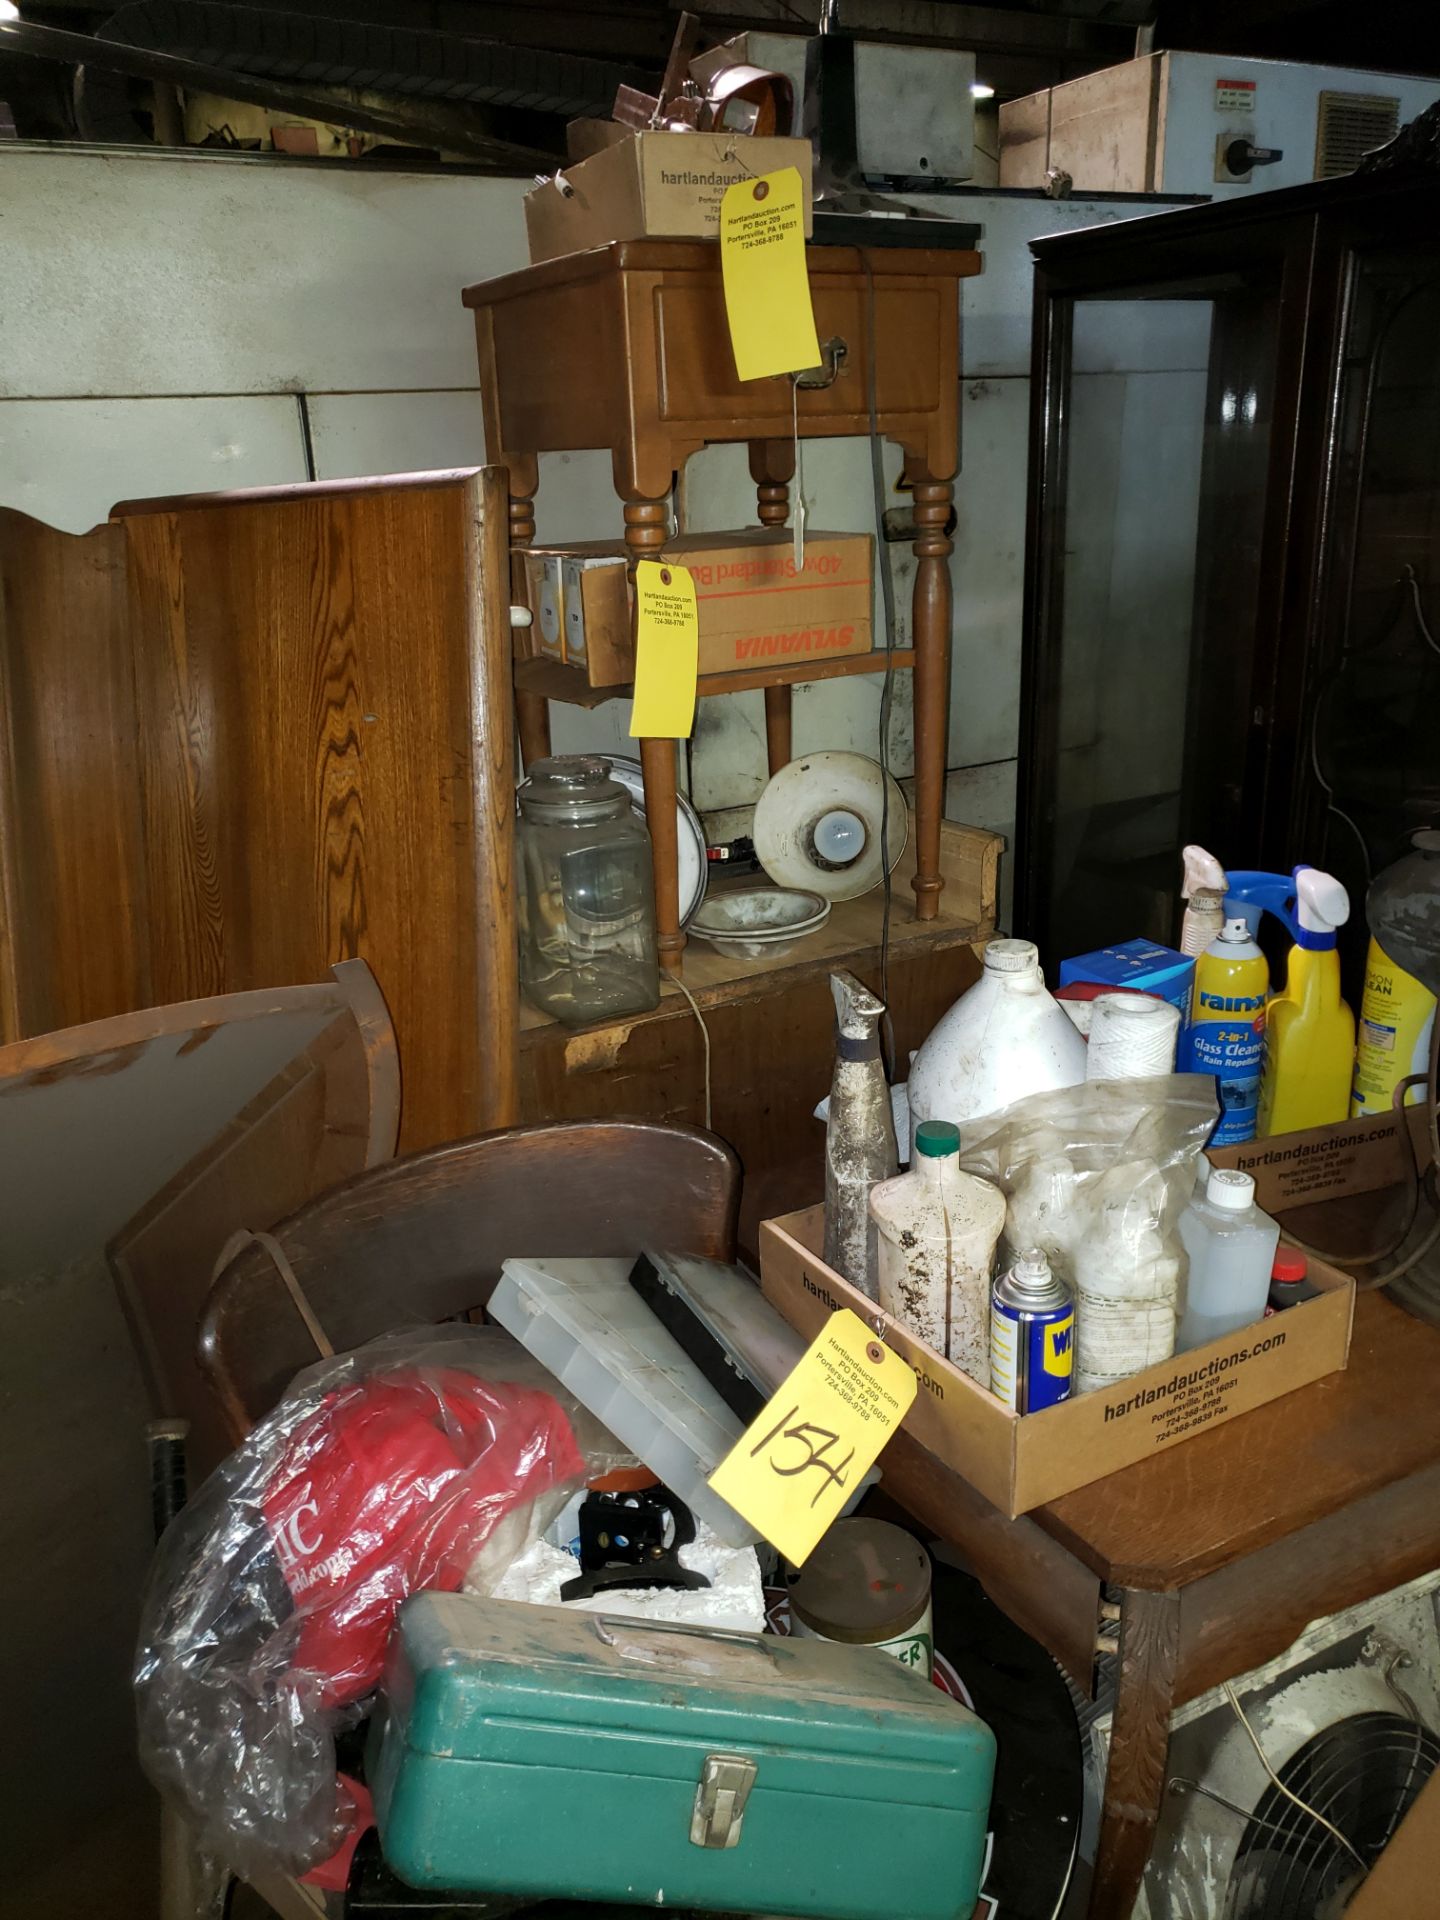 MISC. HOUSEHOLD ITEMS, FANS, FISHING RODS, GOLF - Image 2 of 4